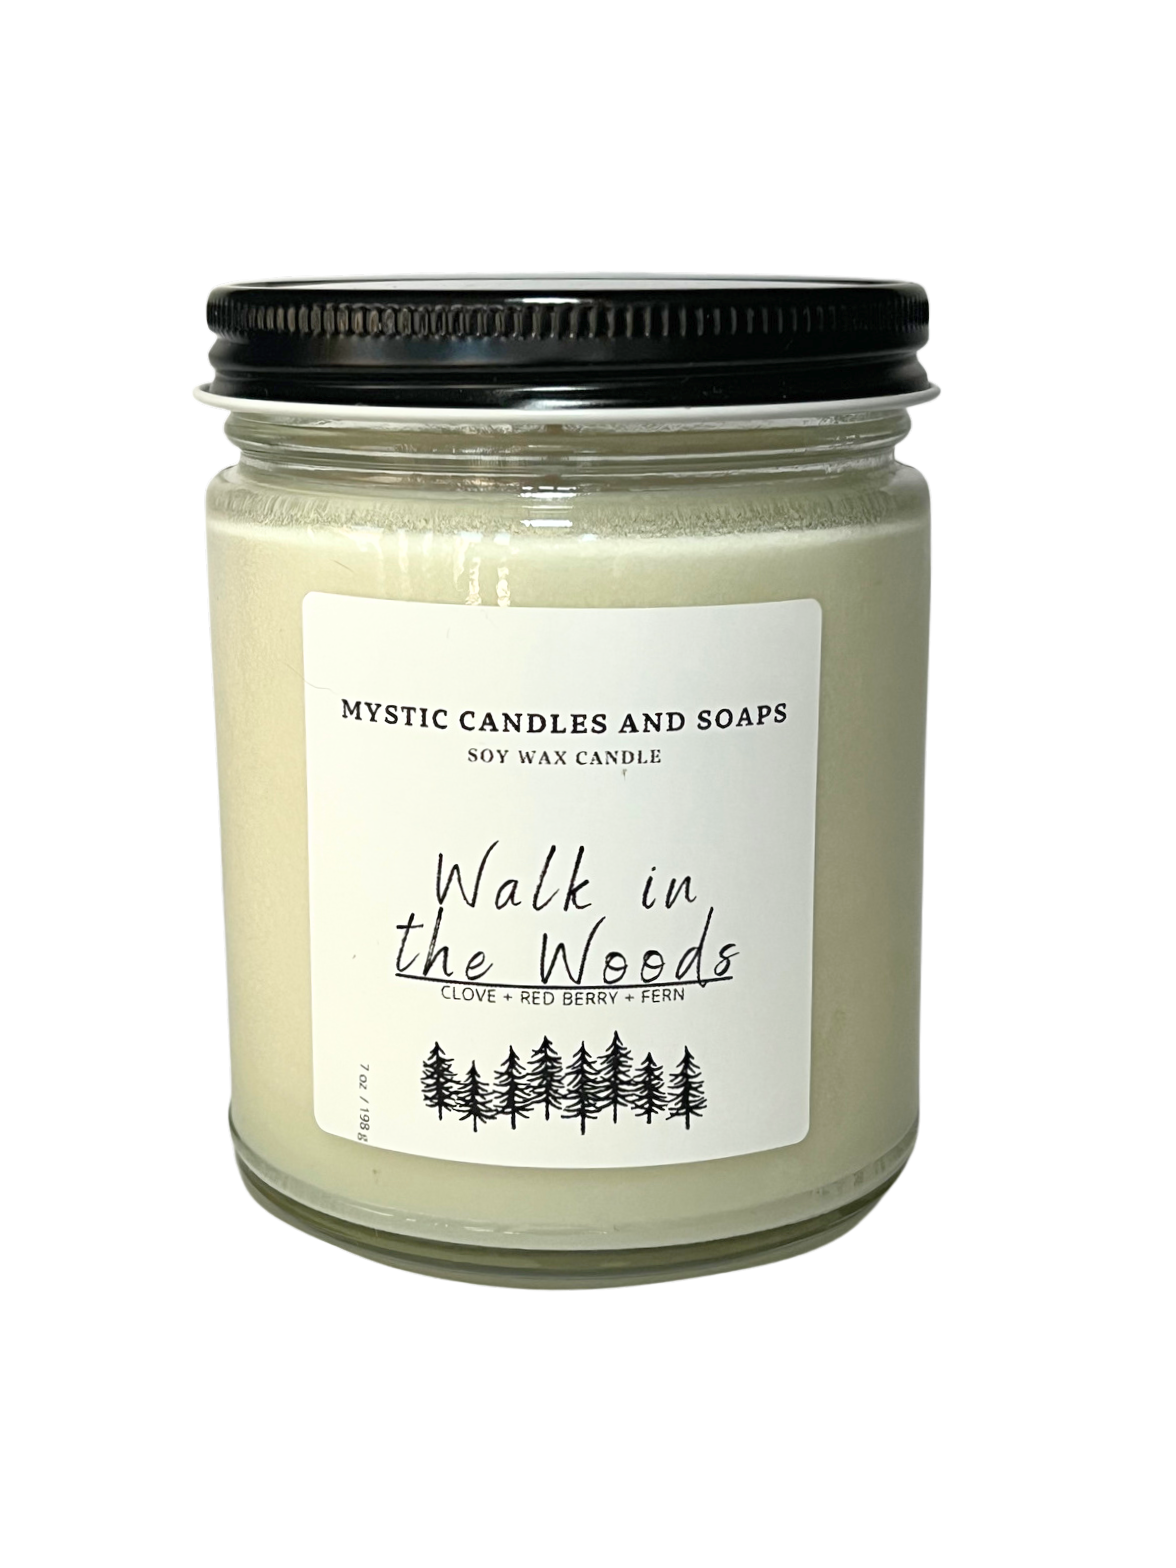 Walk in the Woods Candle - Mystic Candles and Soaps LLC